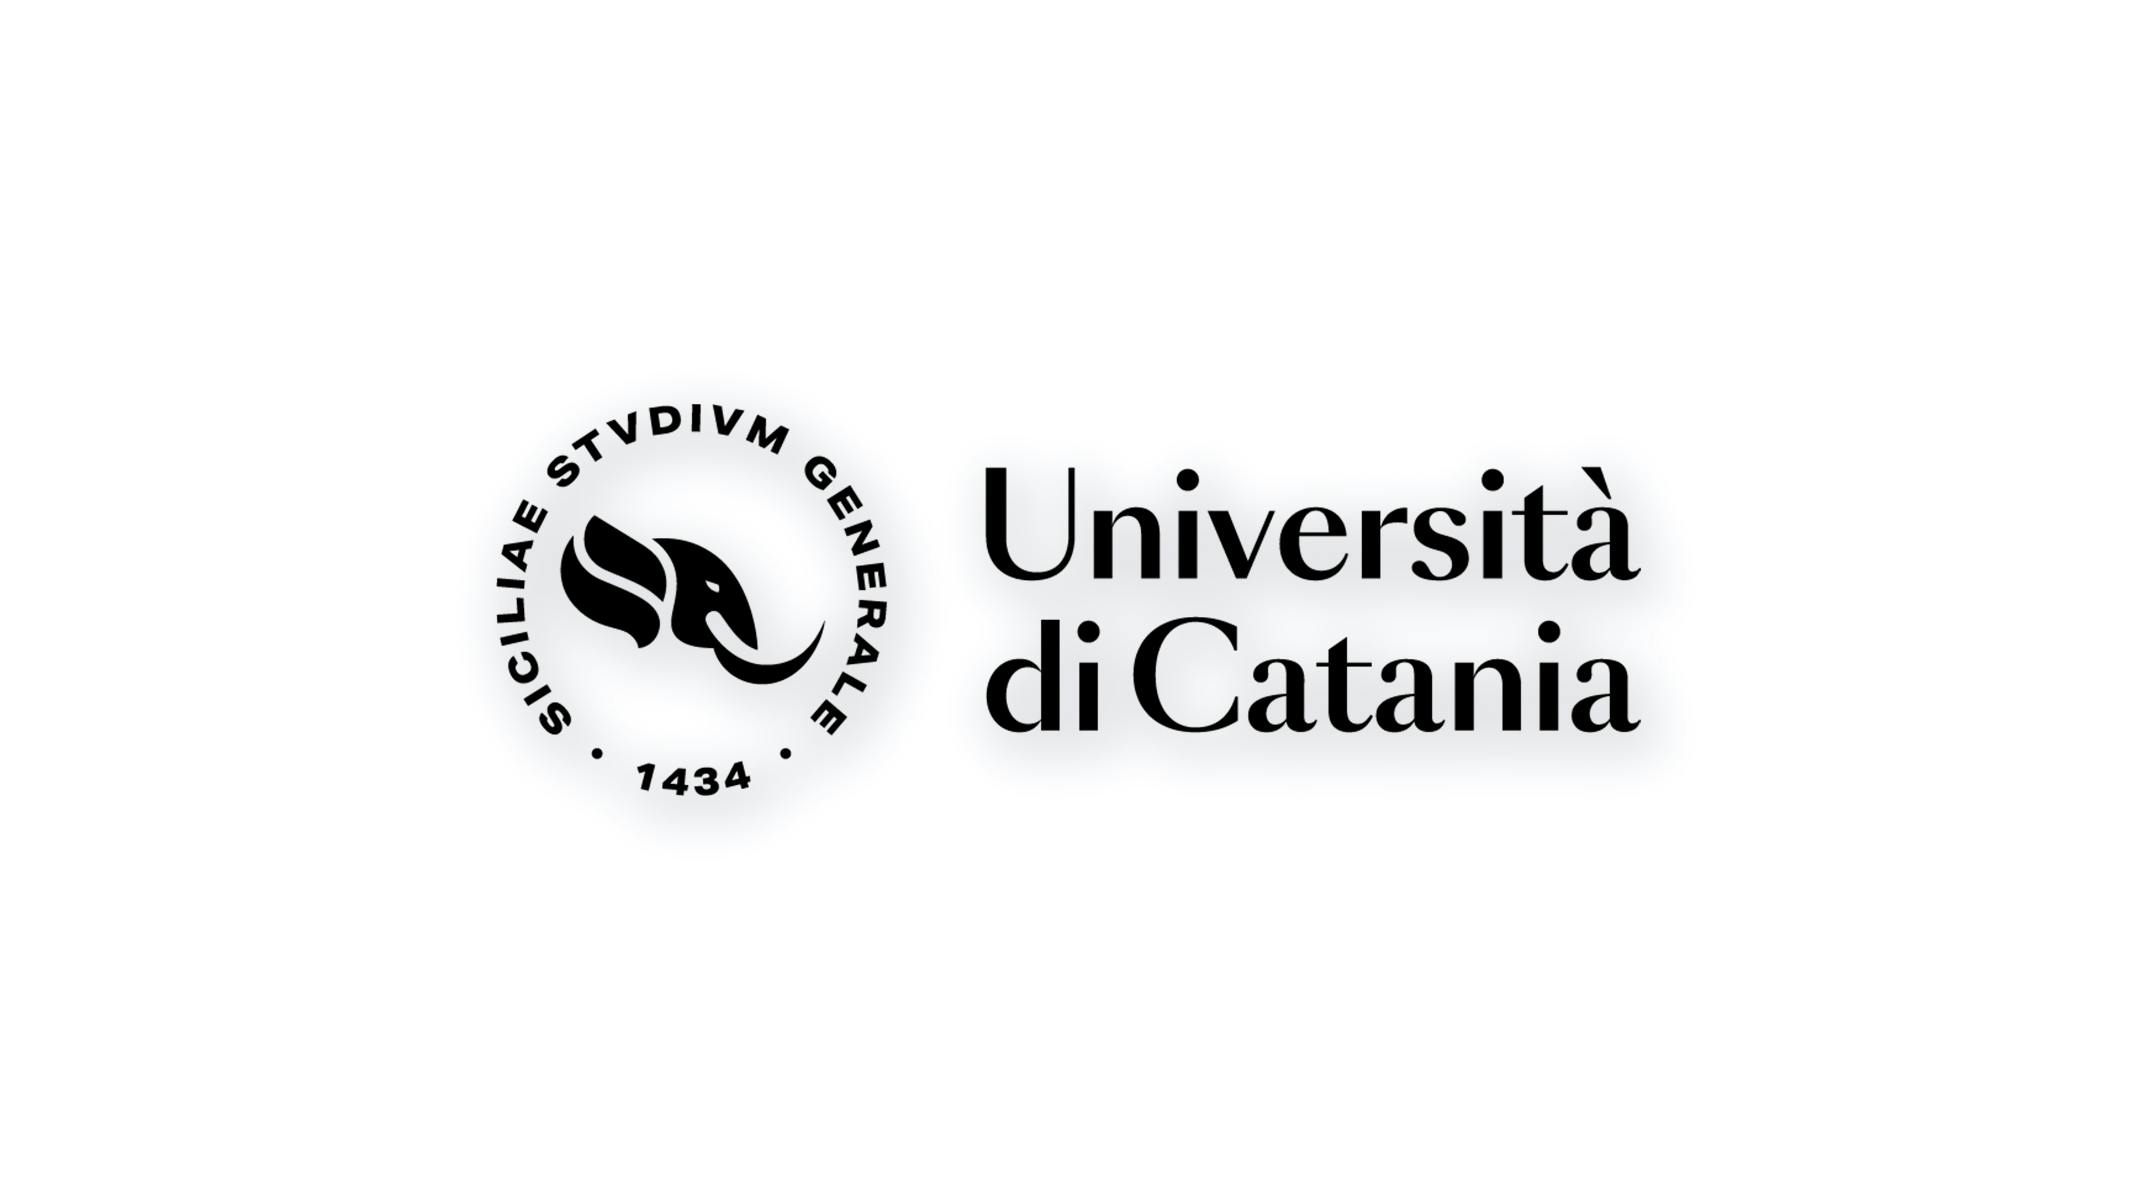 The image shows the logo of the University of Catania. The logo consists of a circle formed by the words "SICILIAE STVDIVM GENERALE - 1434" with a graphic representation of an elephant (symbol of the university) inside. The logo is black on a white background with light shading below the logo.